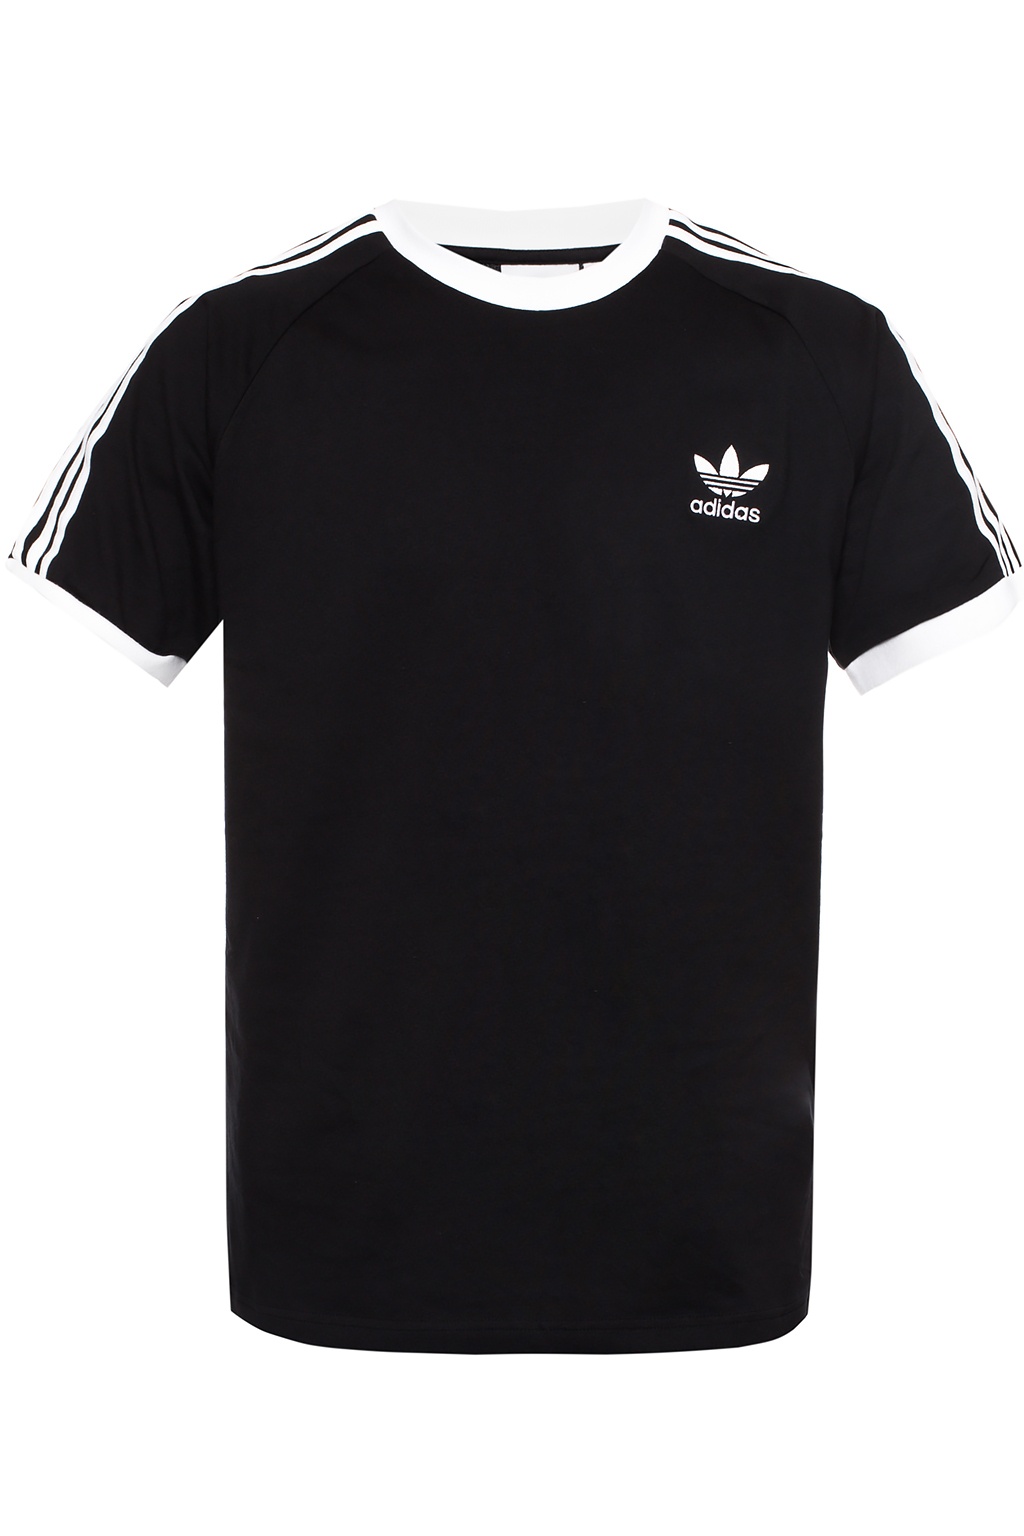 adidas embroidered t shirt